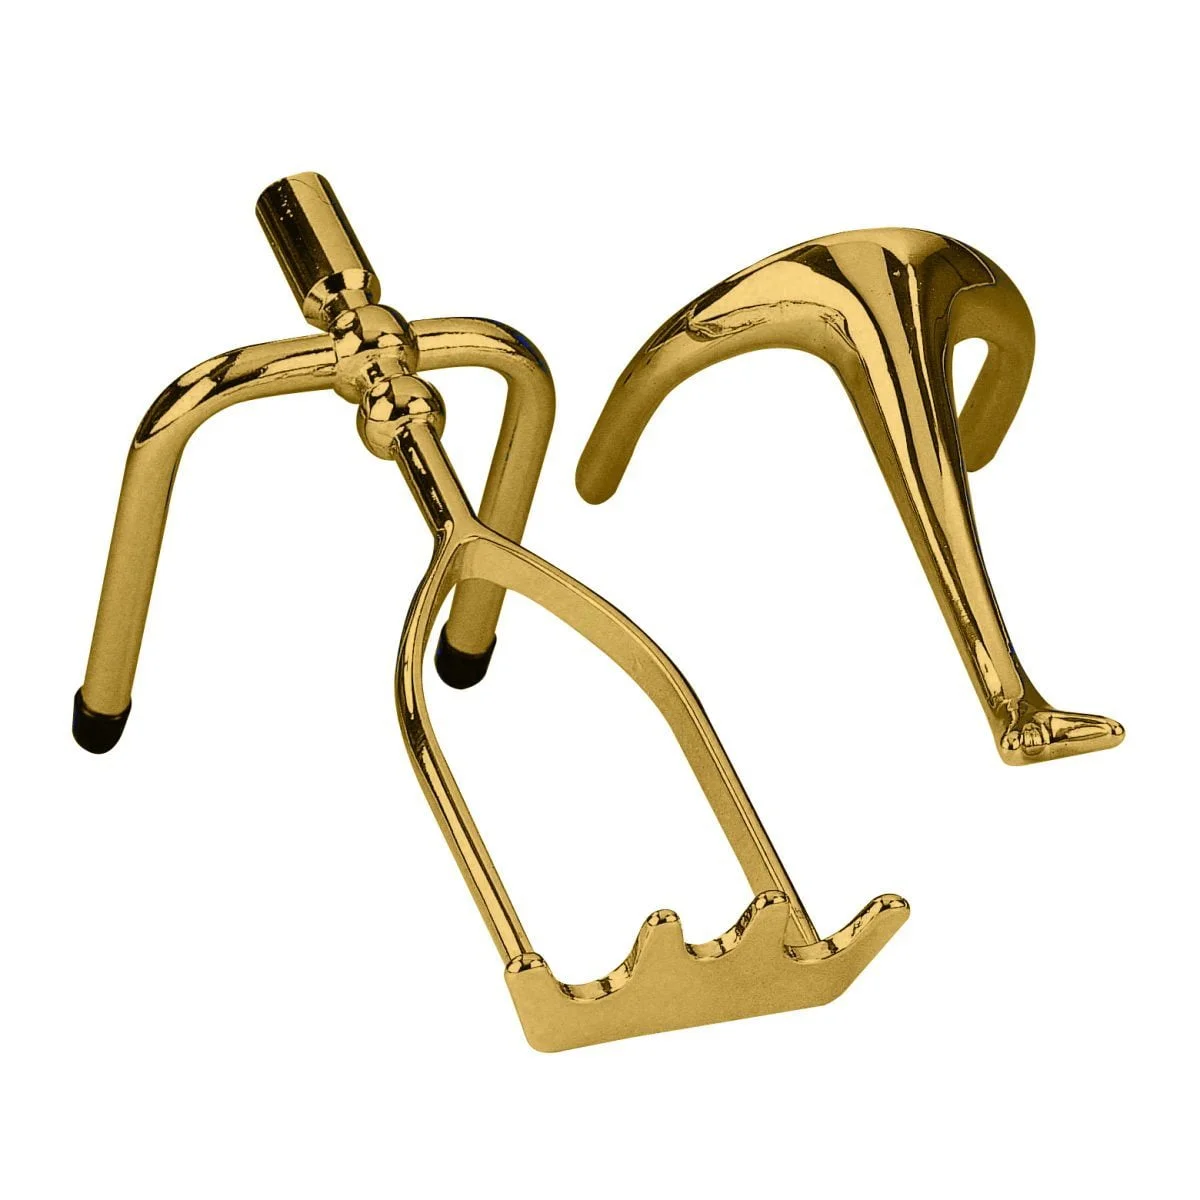 Solid Brass Swan Neck Rest and Brass Extended Spider